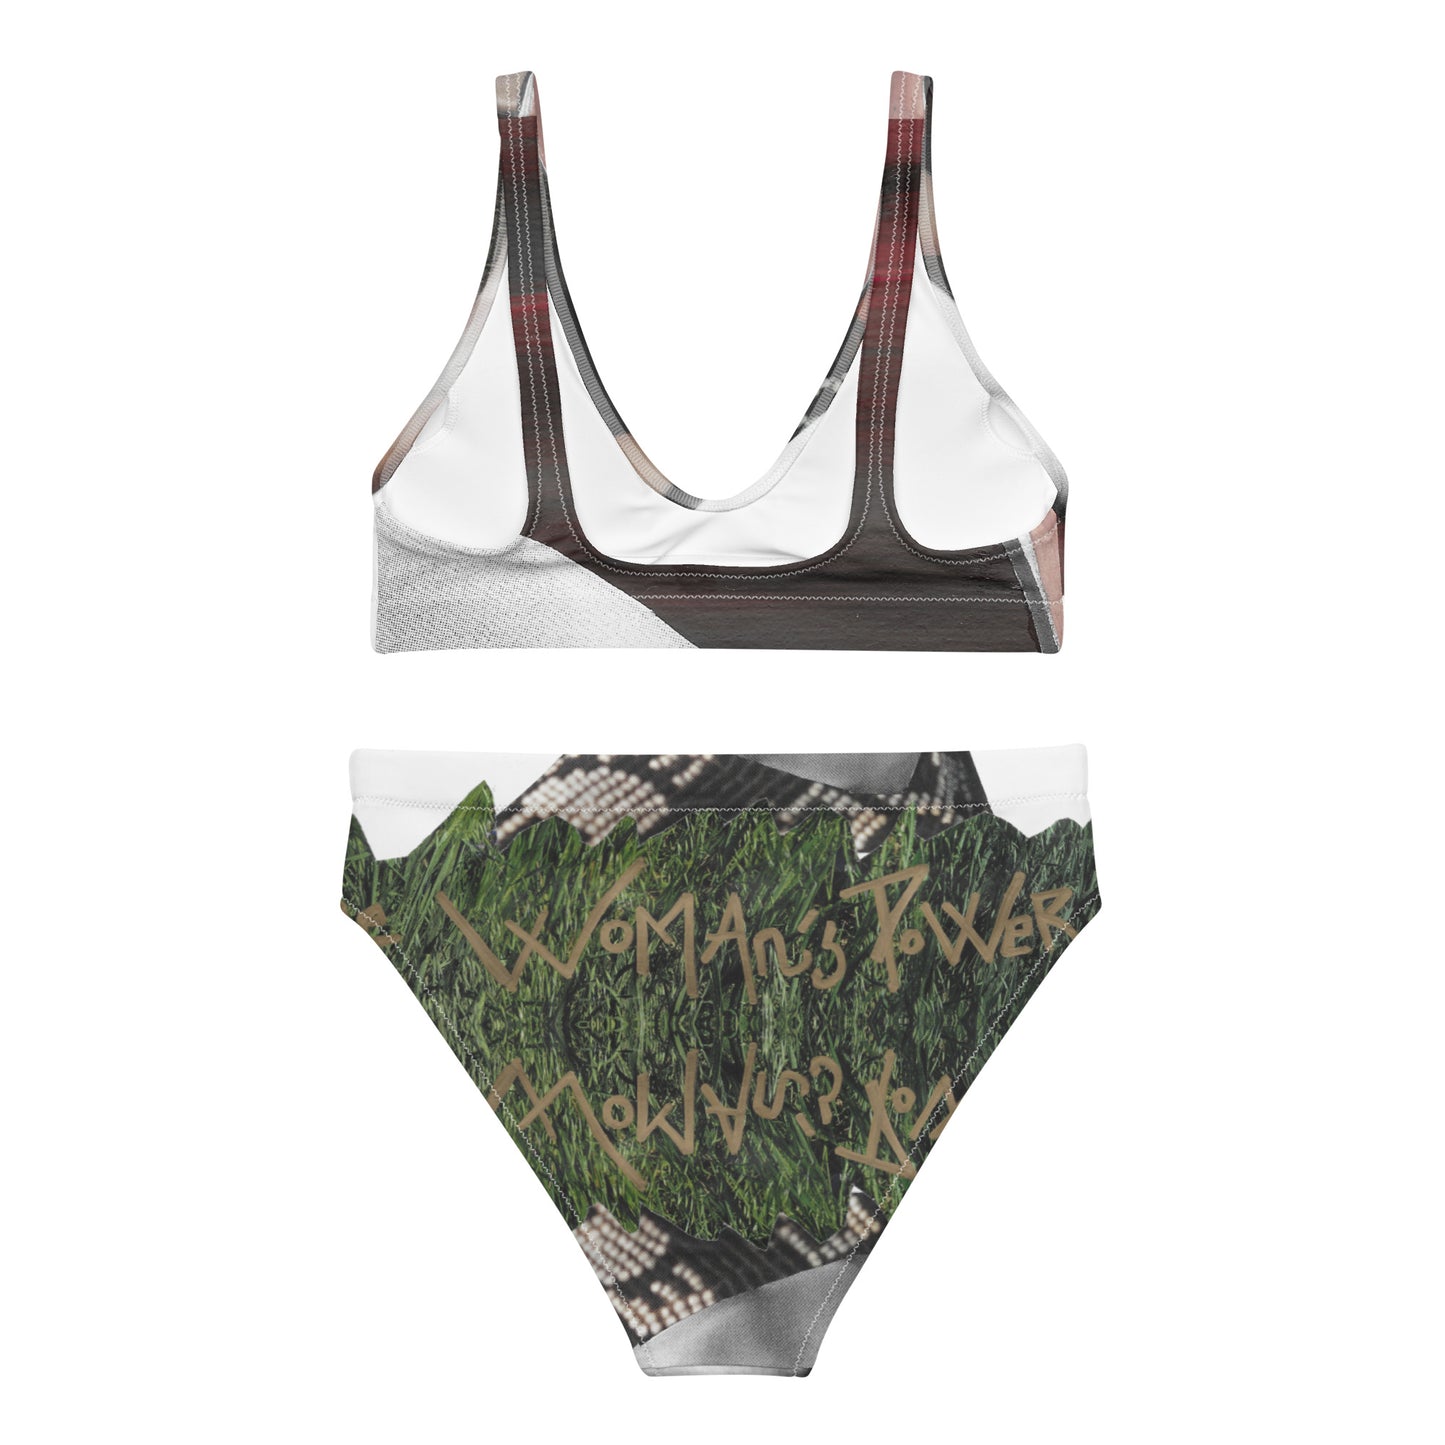 THE WOMAN'S POWER - Eco-responsible high-waisted swimsuit